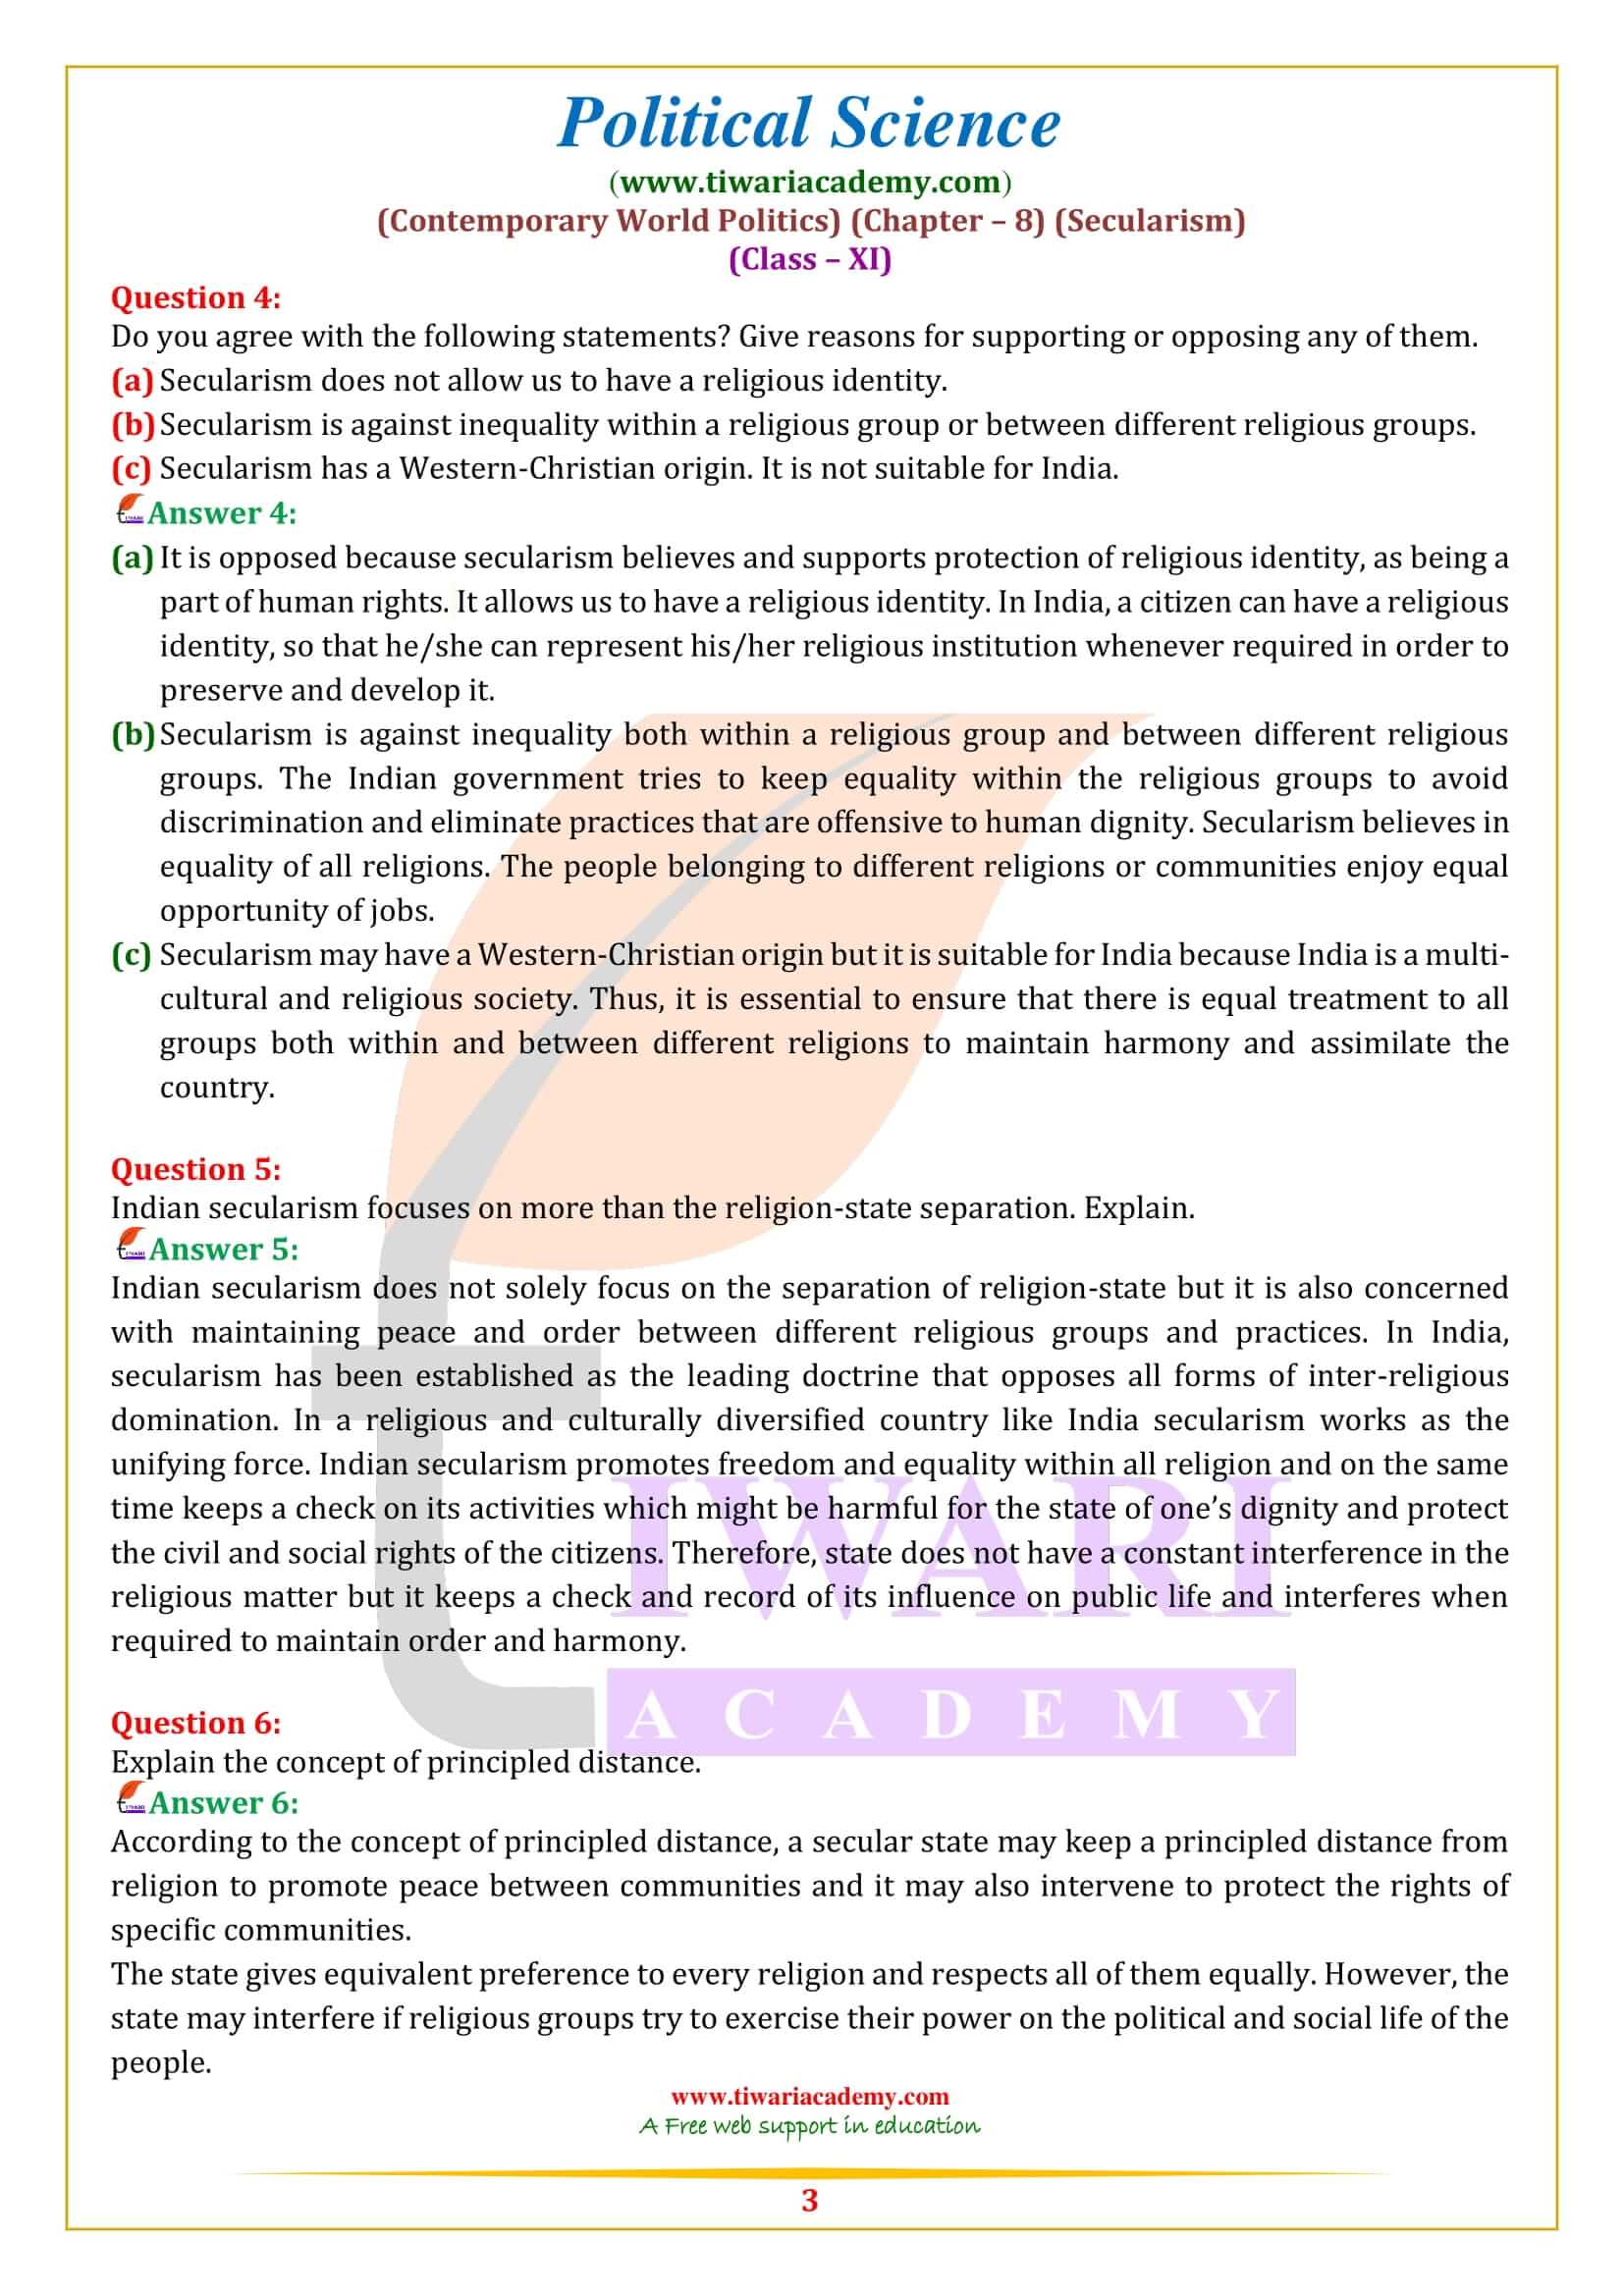 NCERT Solutions for Class 11 Political Science Chapter 8 in English Medium